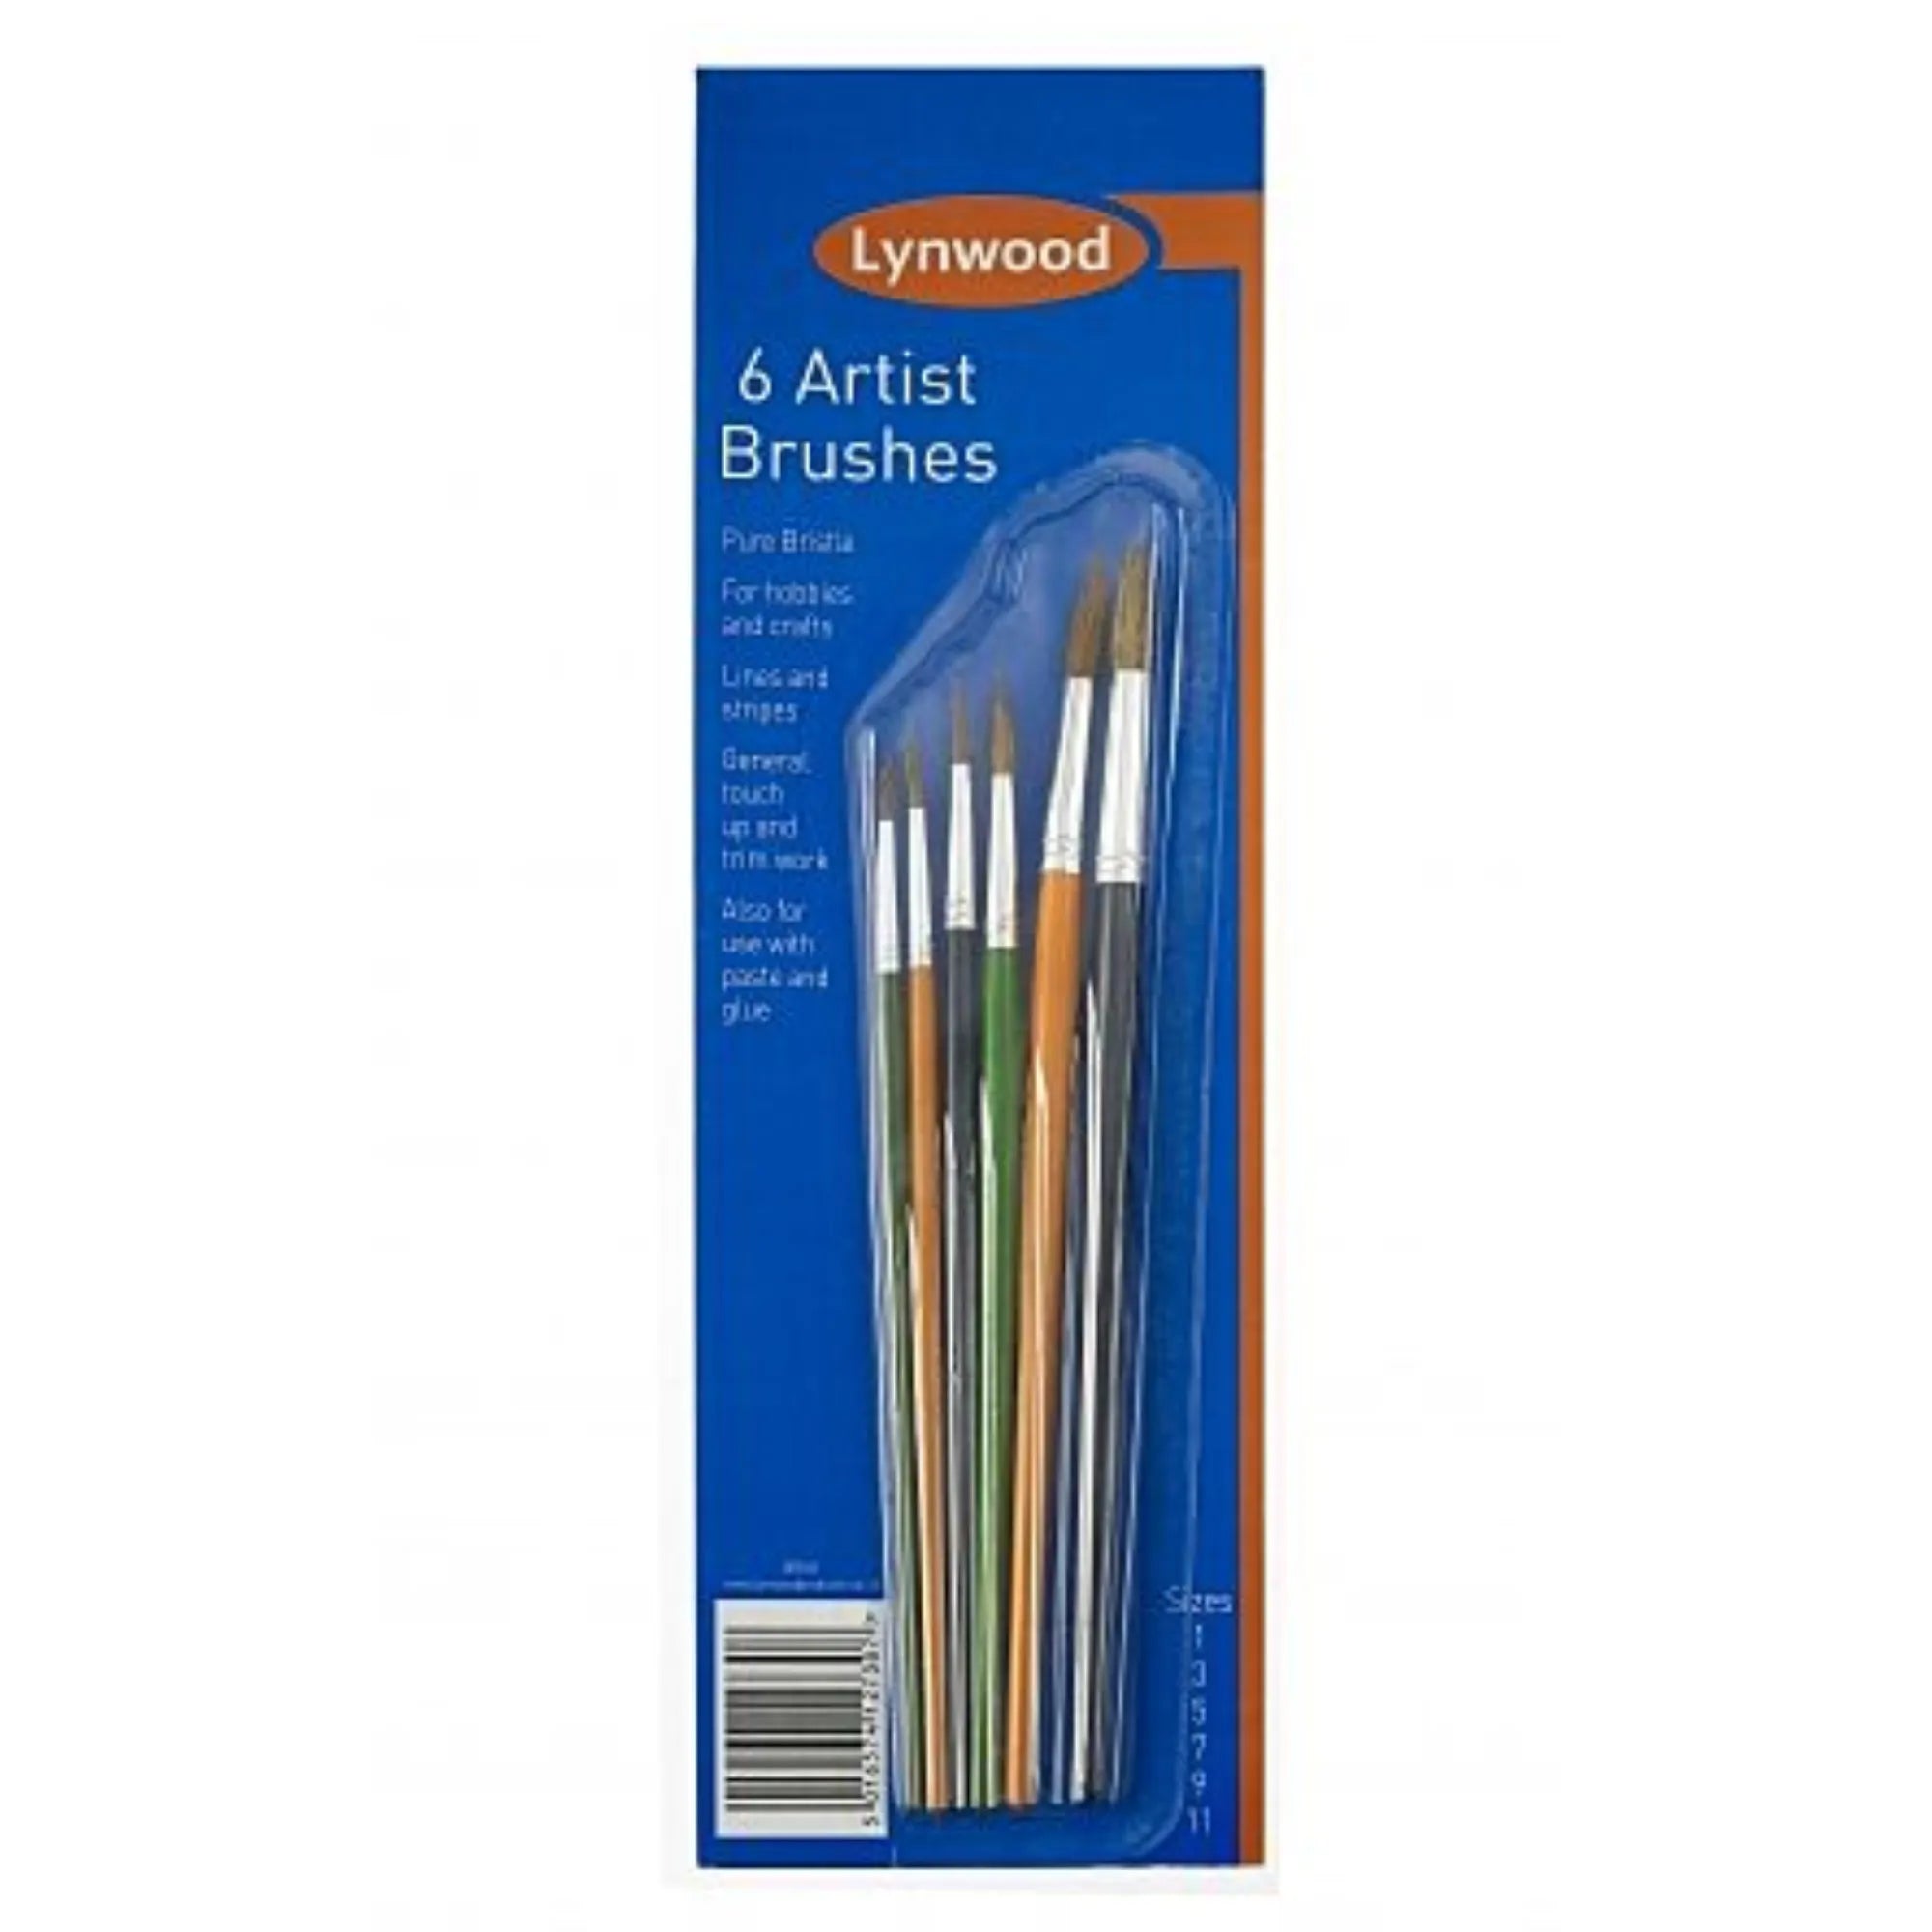 6 Artists Brushes